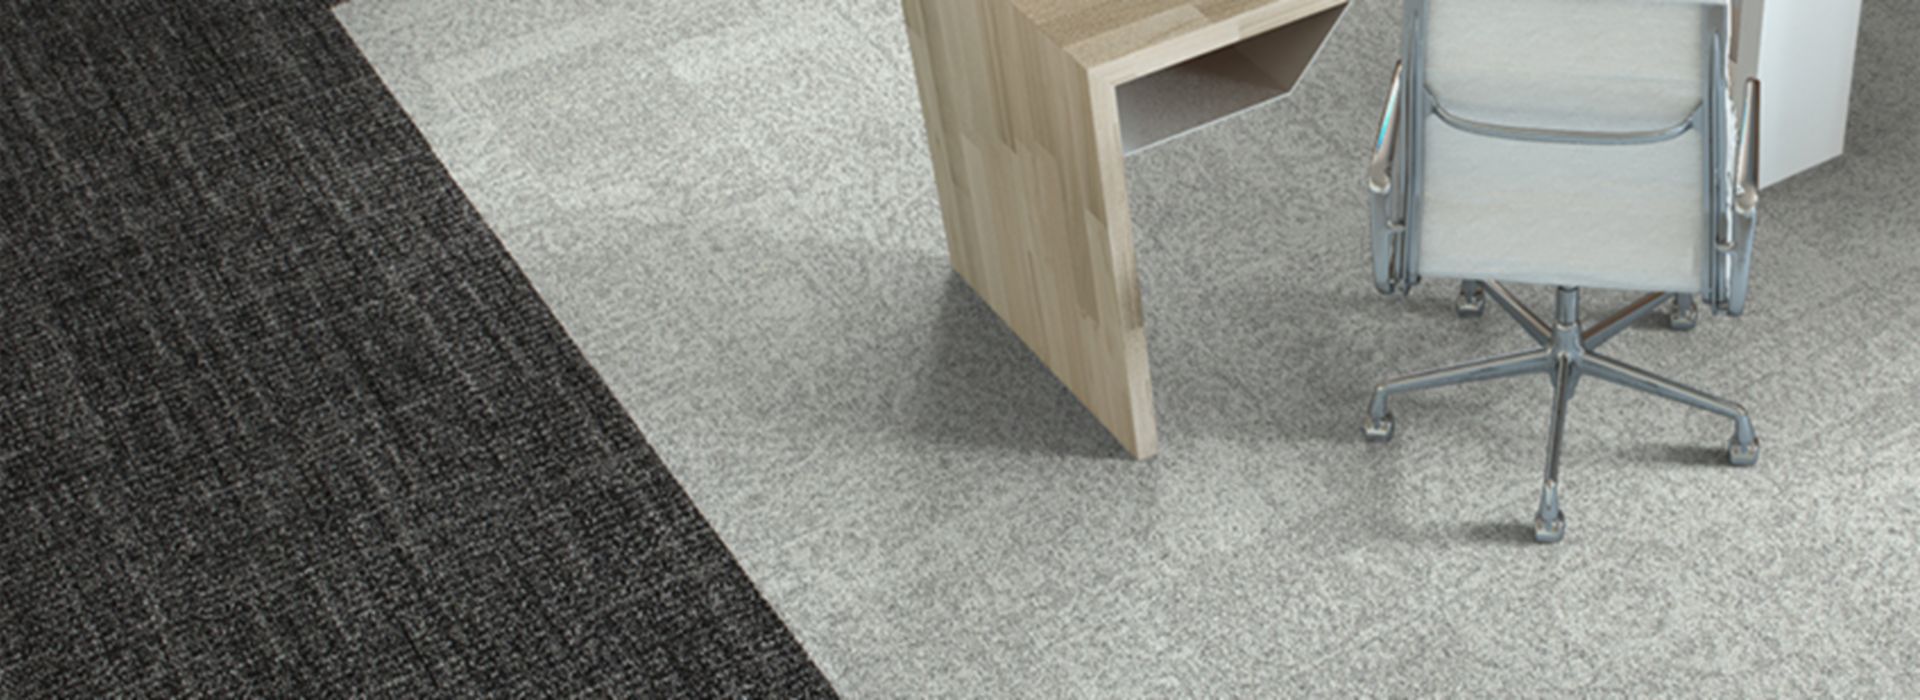 Interface Open Air 405 carpet tile in overhead view with small wooden workstation image number 1